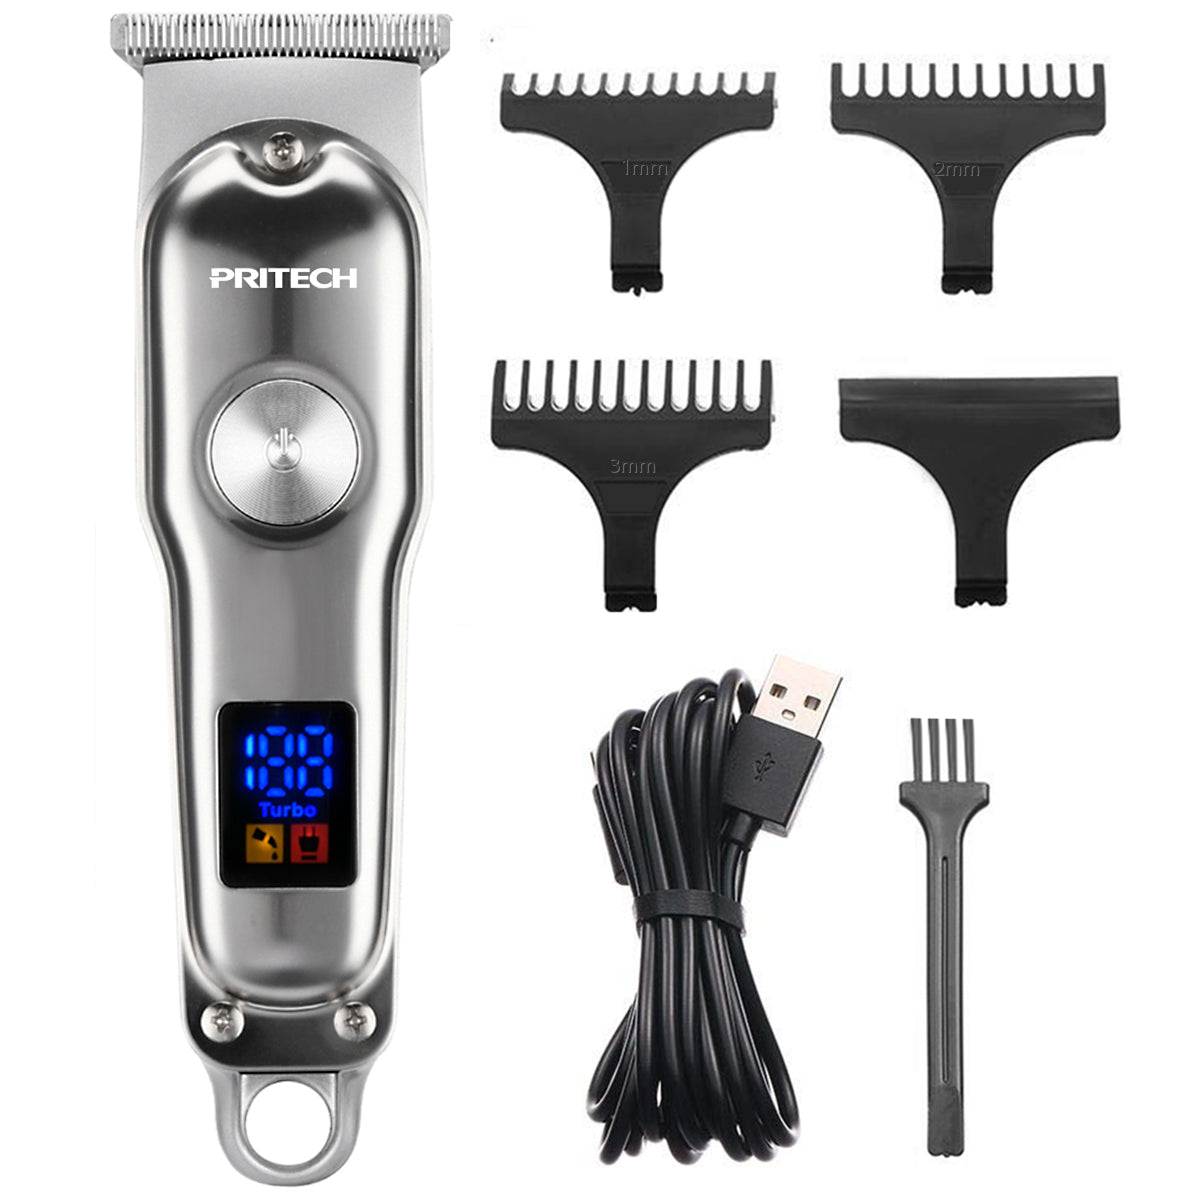 Rechargeable Electric Trimmer with LED Screen Pr-2749LED